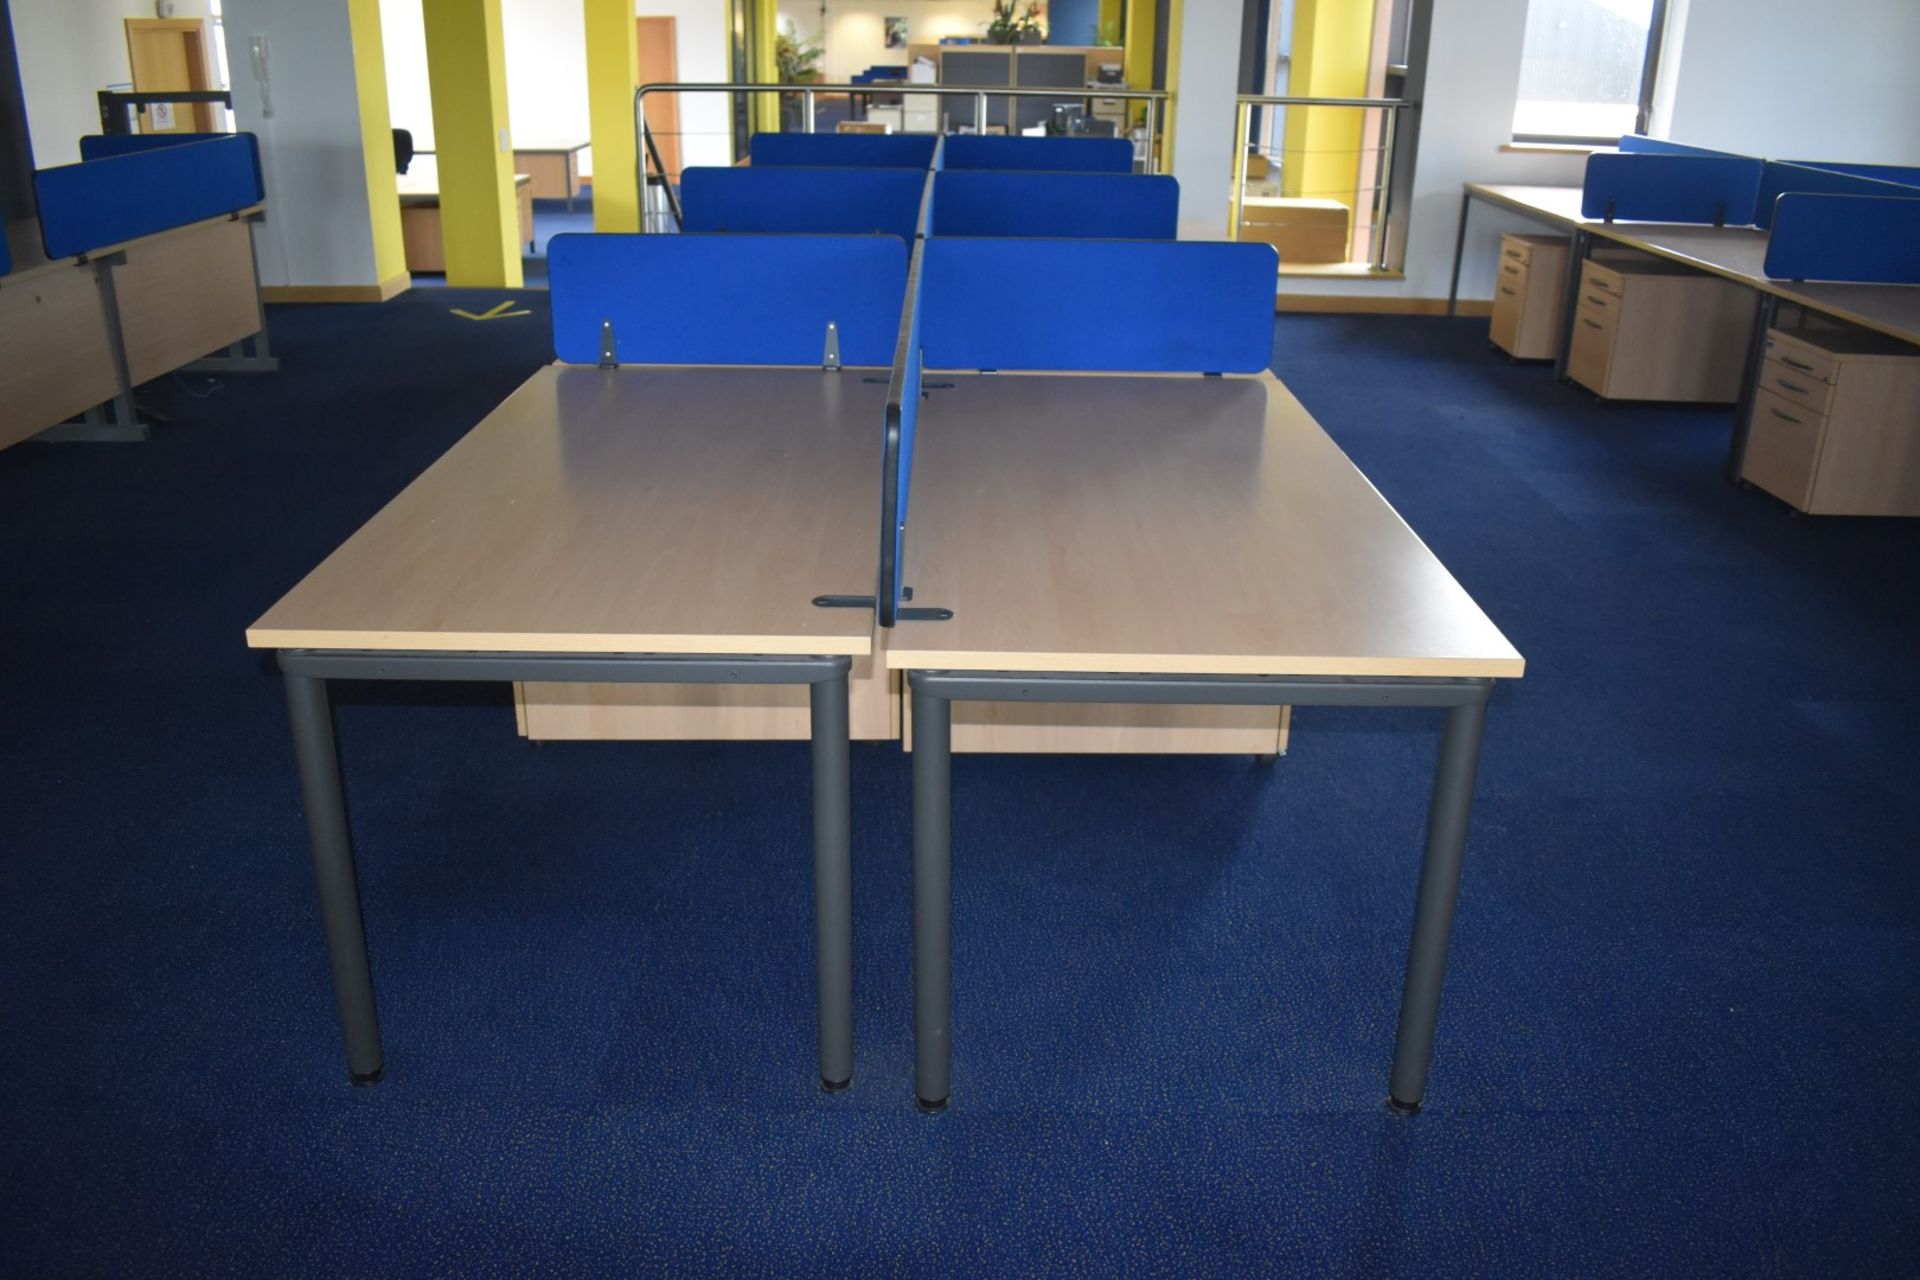 8 x Beech Office Desks With Drawer Pedestals and Privacy Partitions - H72 x W160 x D80 cms - Ref - Image 4 of 11